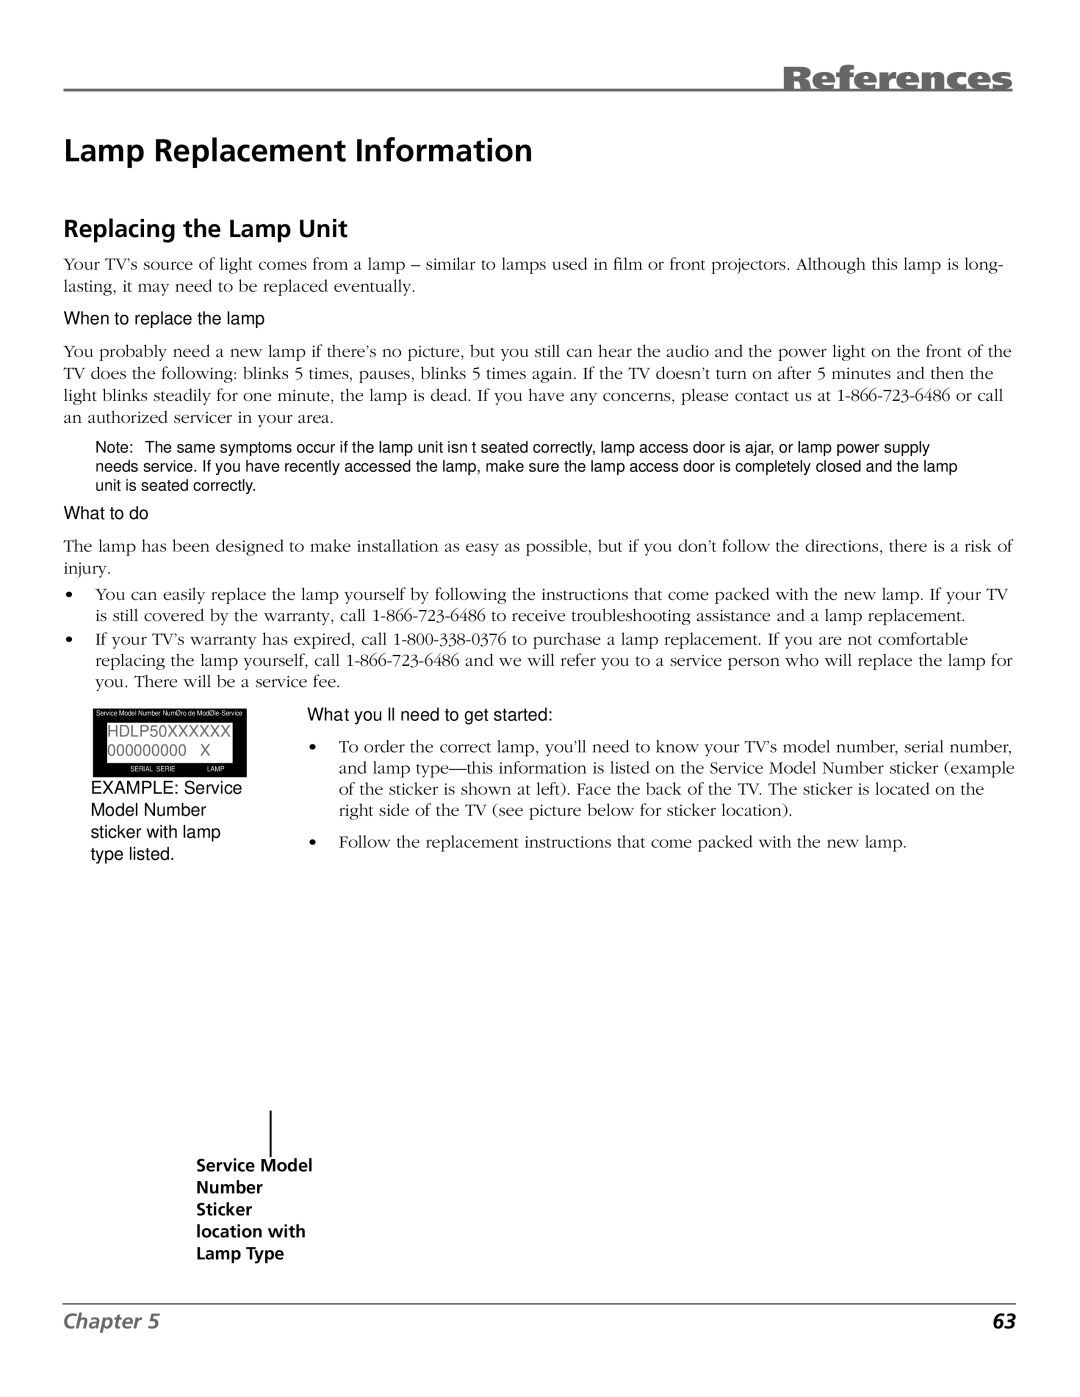 RCA HDTV manual Lamp Replacement Information, Replacing the Lamp Unit 